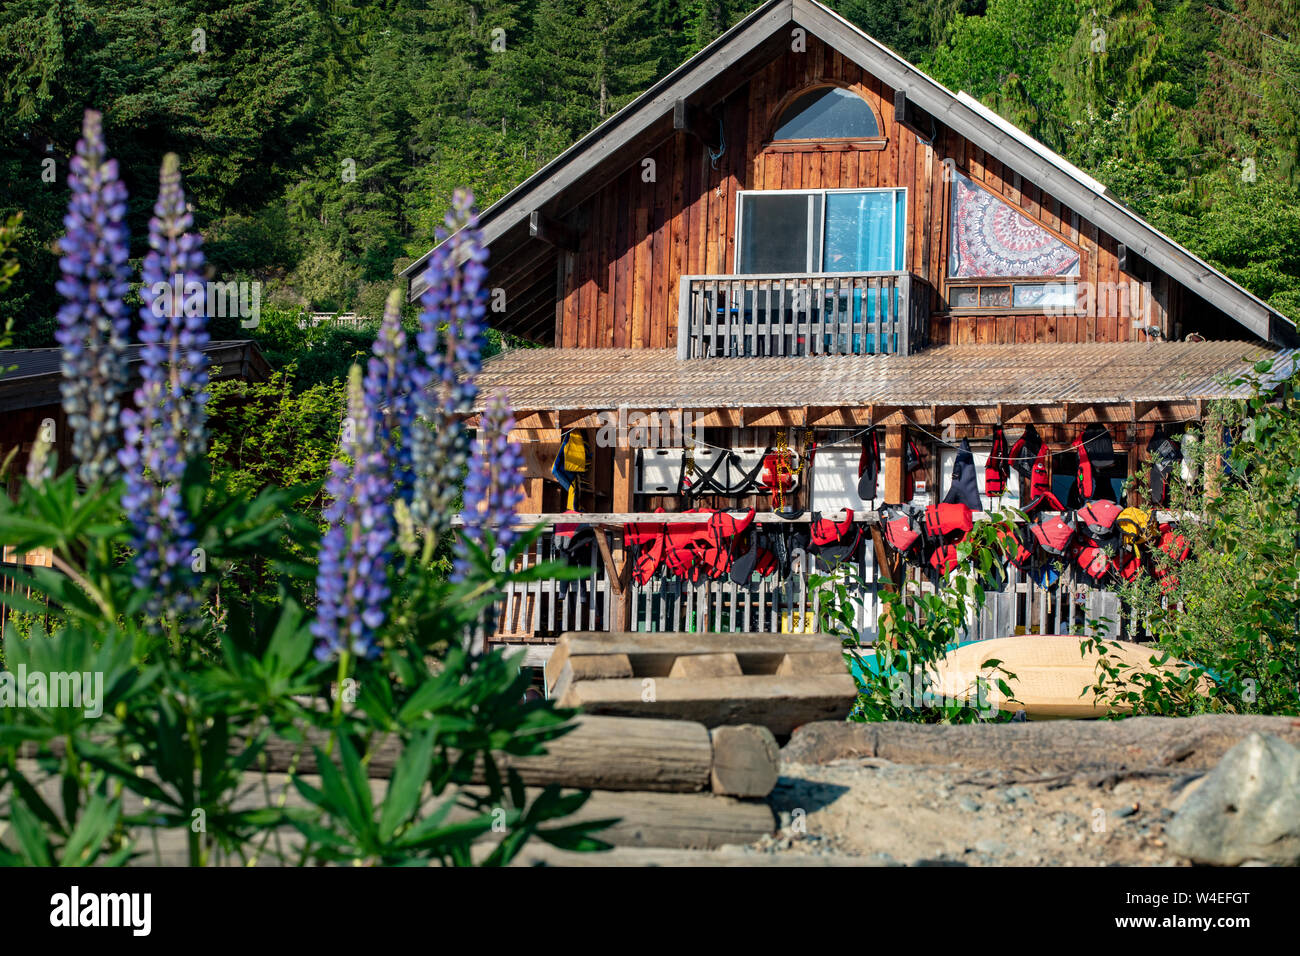 Waterfont Equipment Center at Strathcona Park Lodge in Strathcona Provincial Park, near Campbell River, Vancouver Island, British Columbia, Canada Stock Photo